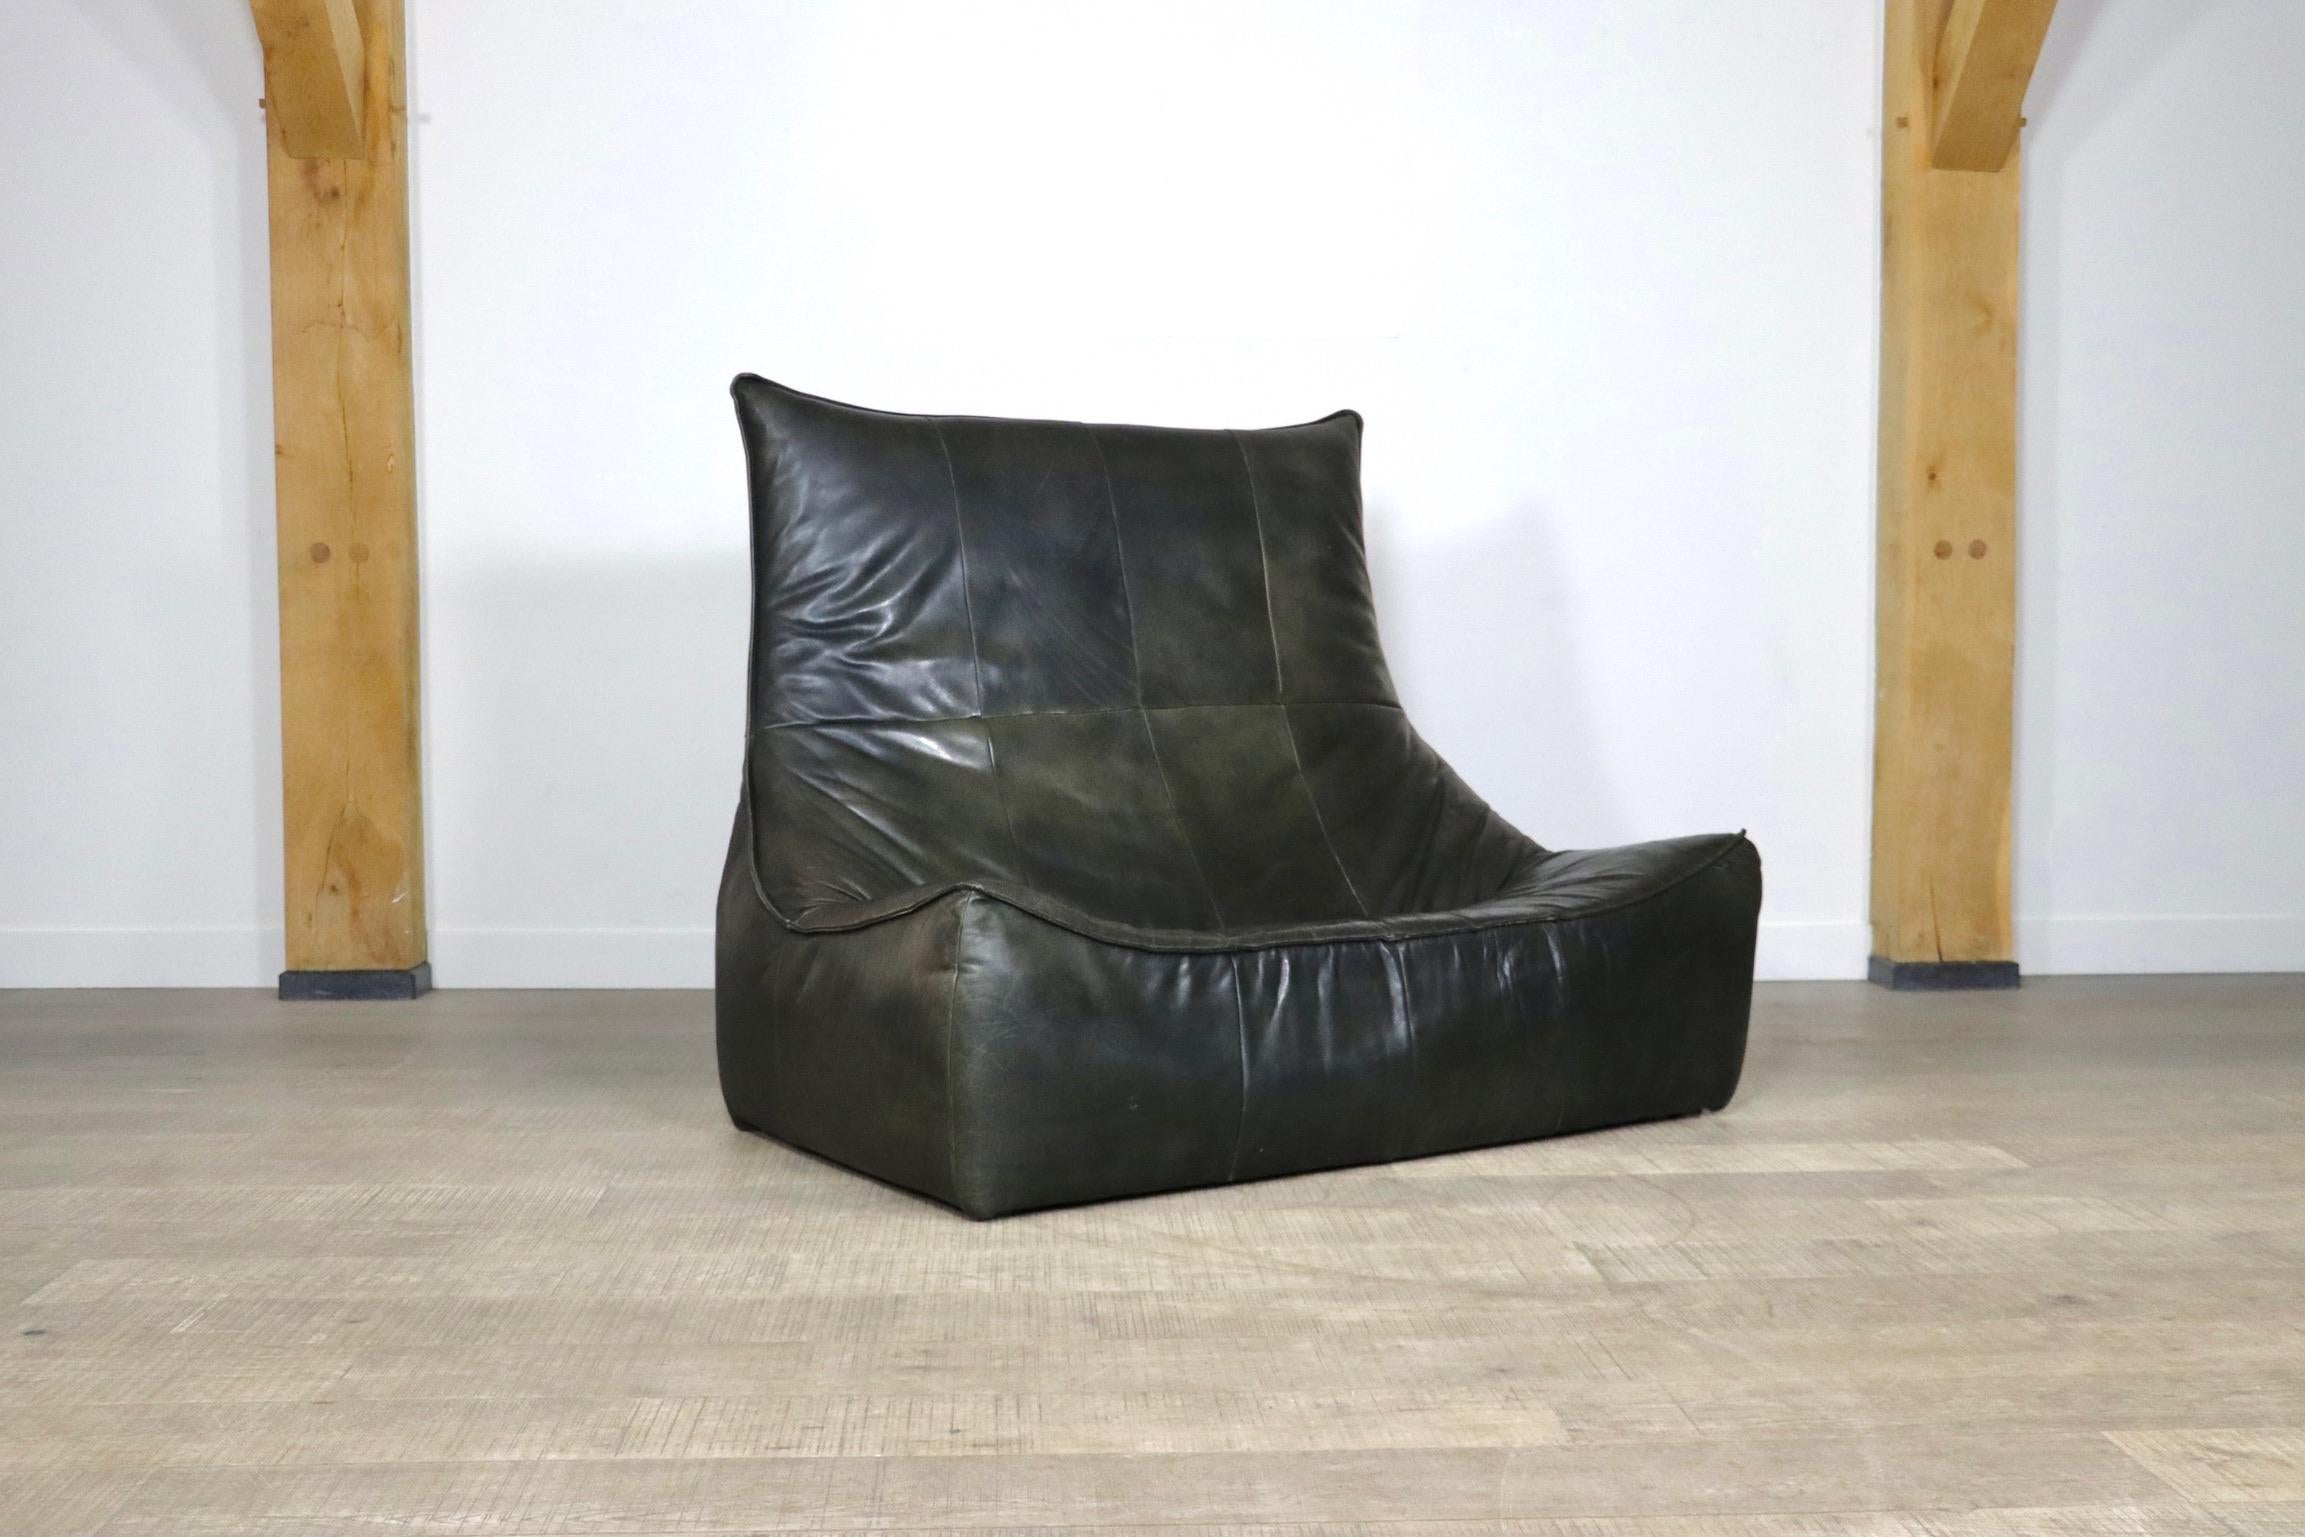 Stunning dark green leather ‘The Rock’ two seater sofa by Gerard van den Berg, for Montis 1970s. This sofa is also known as the “Florence” . The sofa features a high quality dark green leather upholstery. This iconic sofa will give any space a